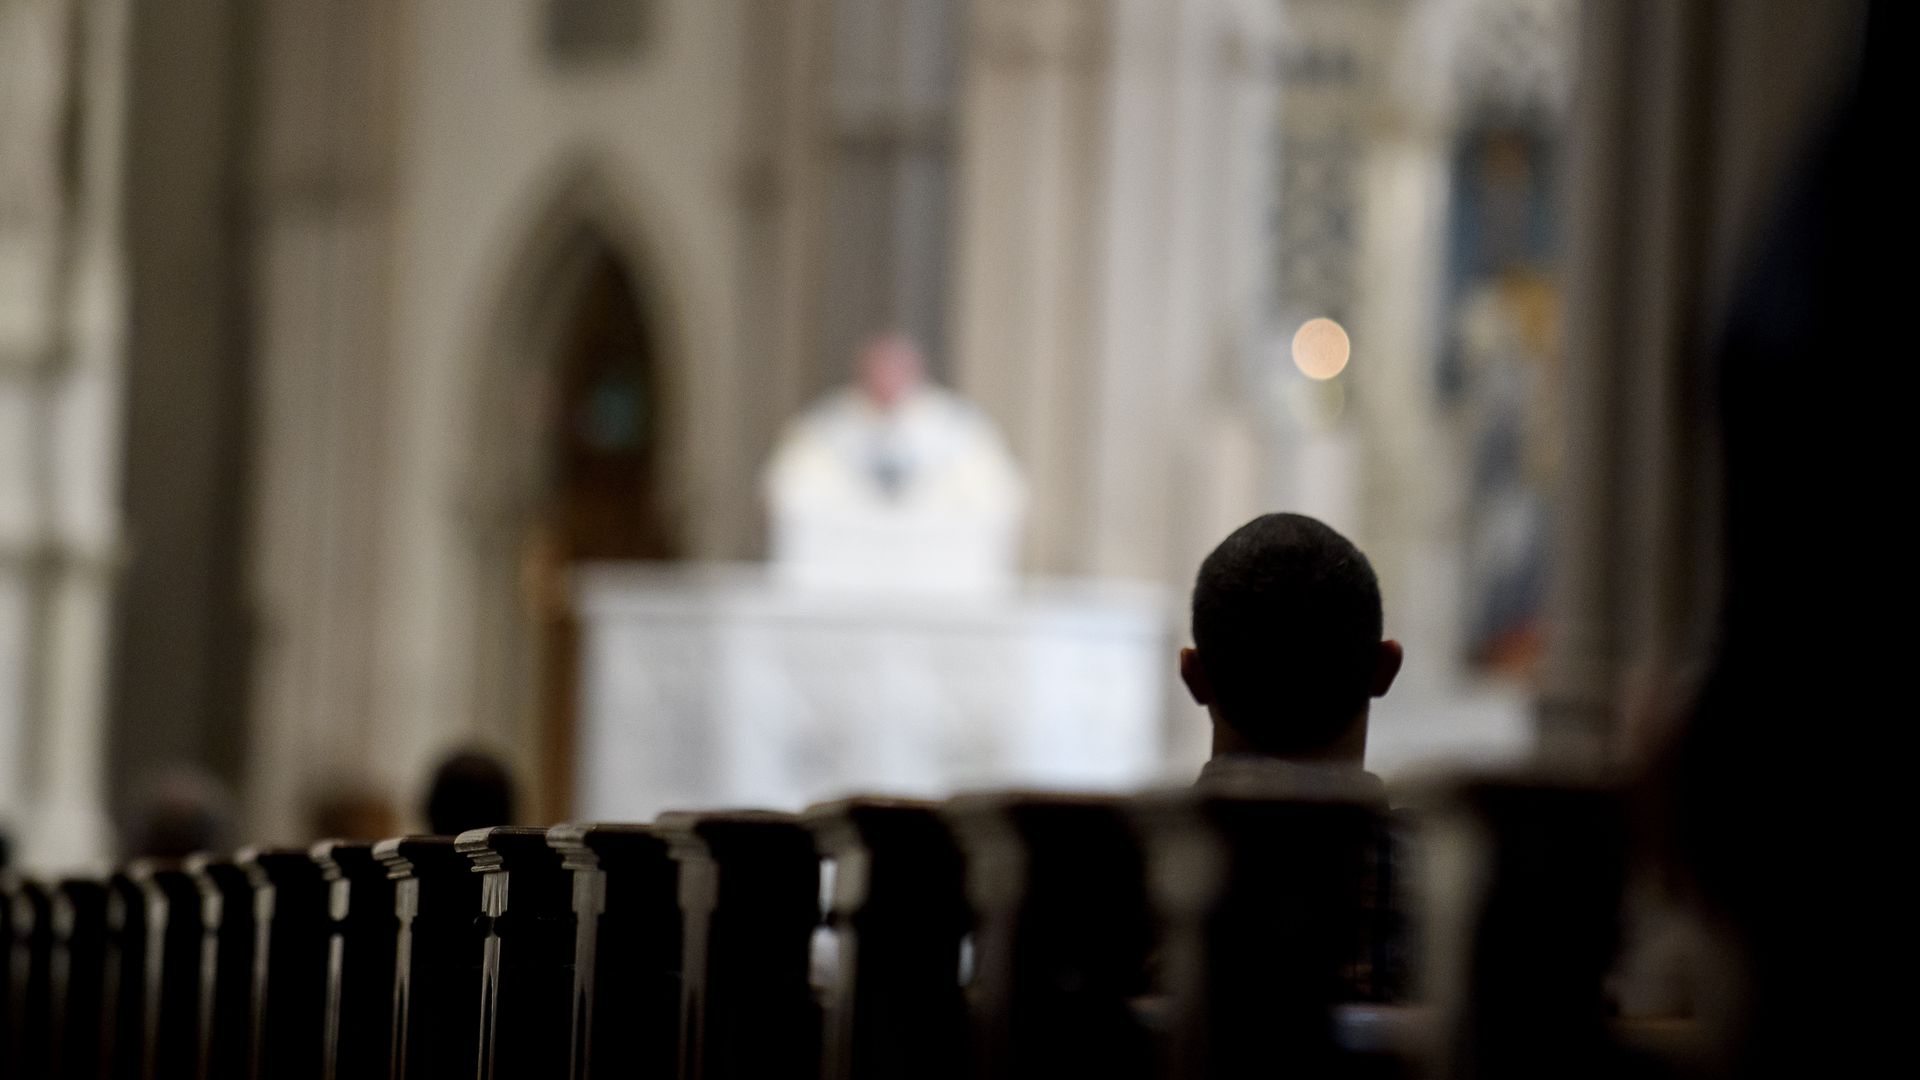 Catholic mass shows silhouetted figure in pews.